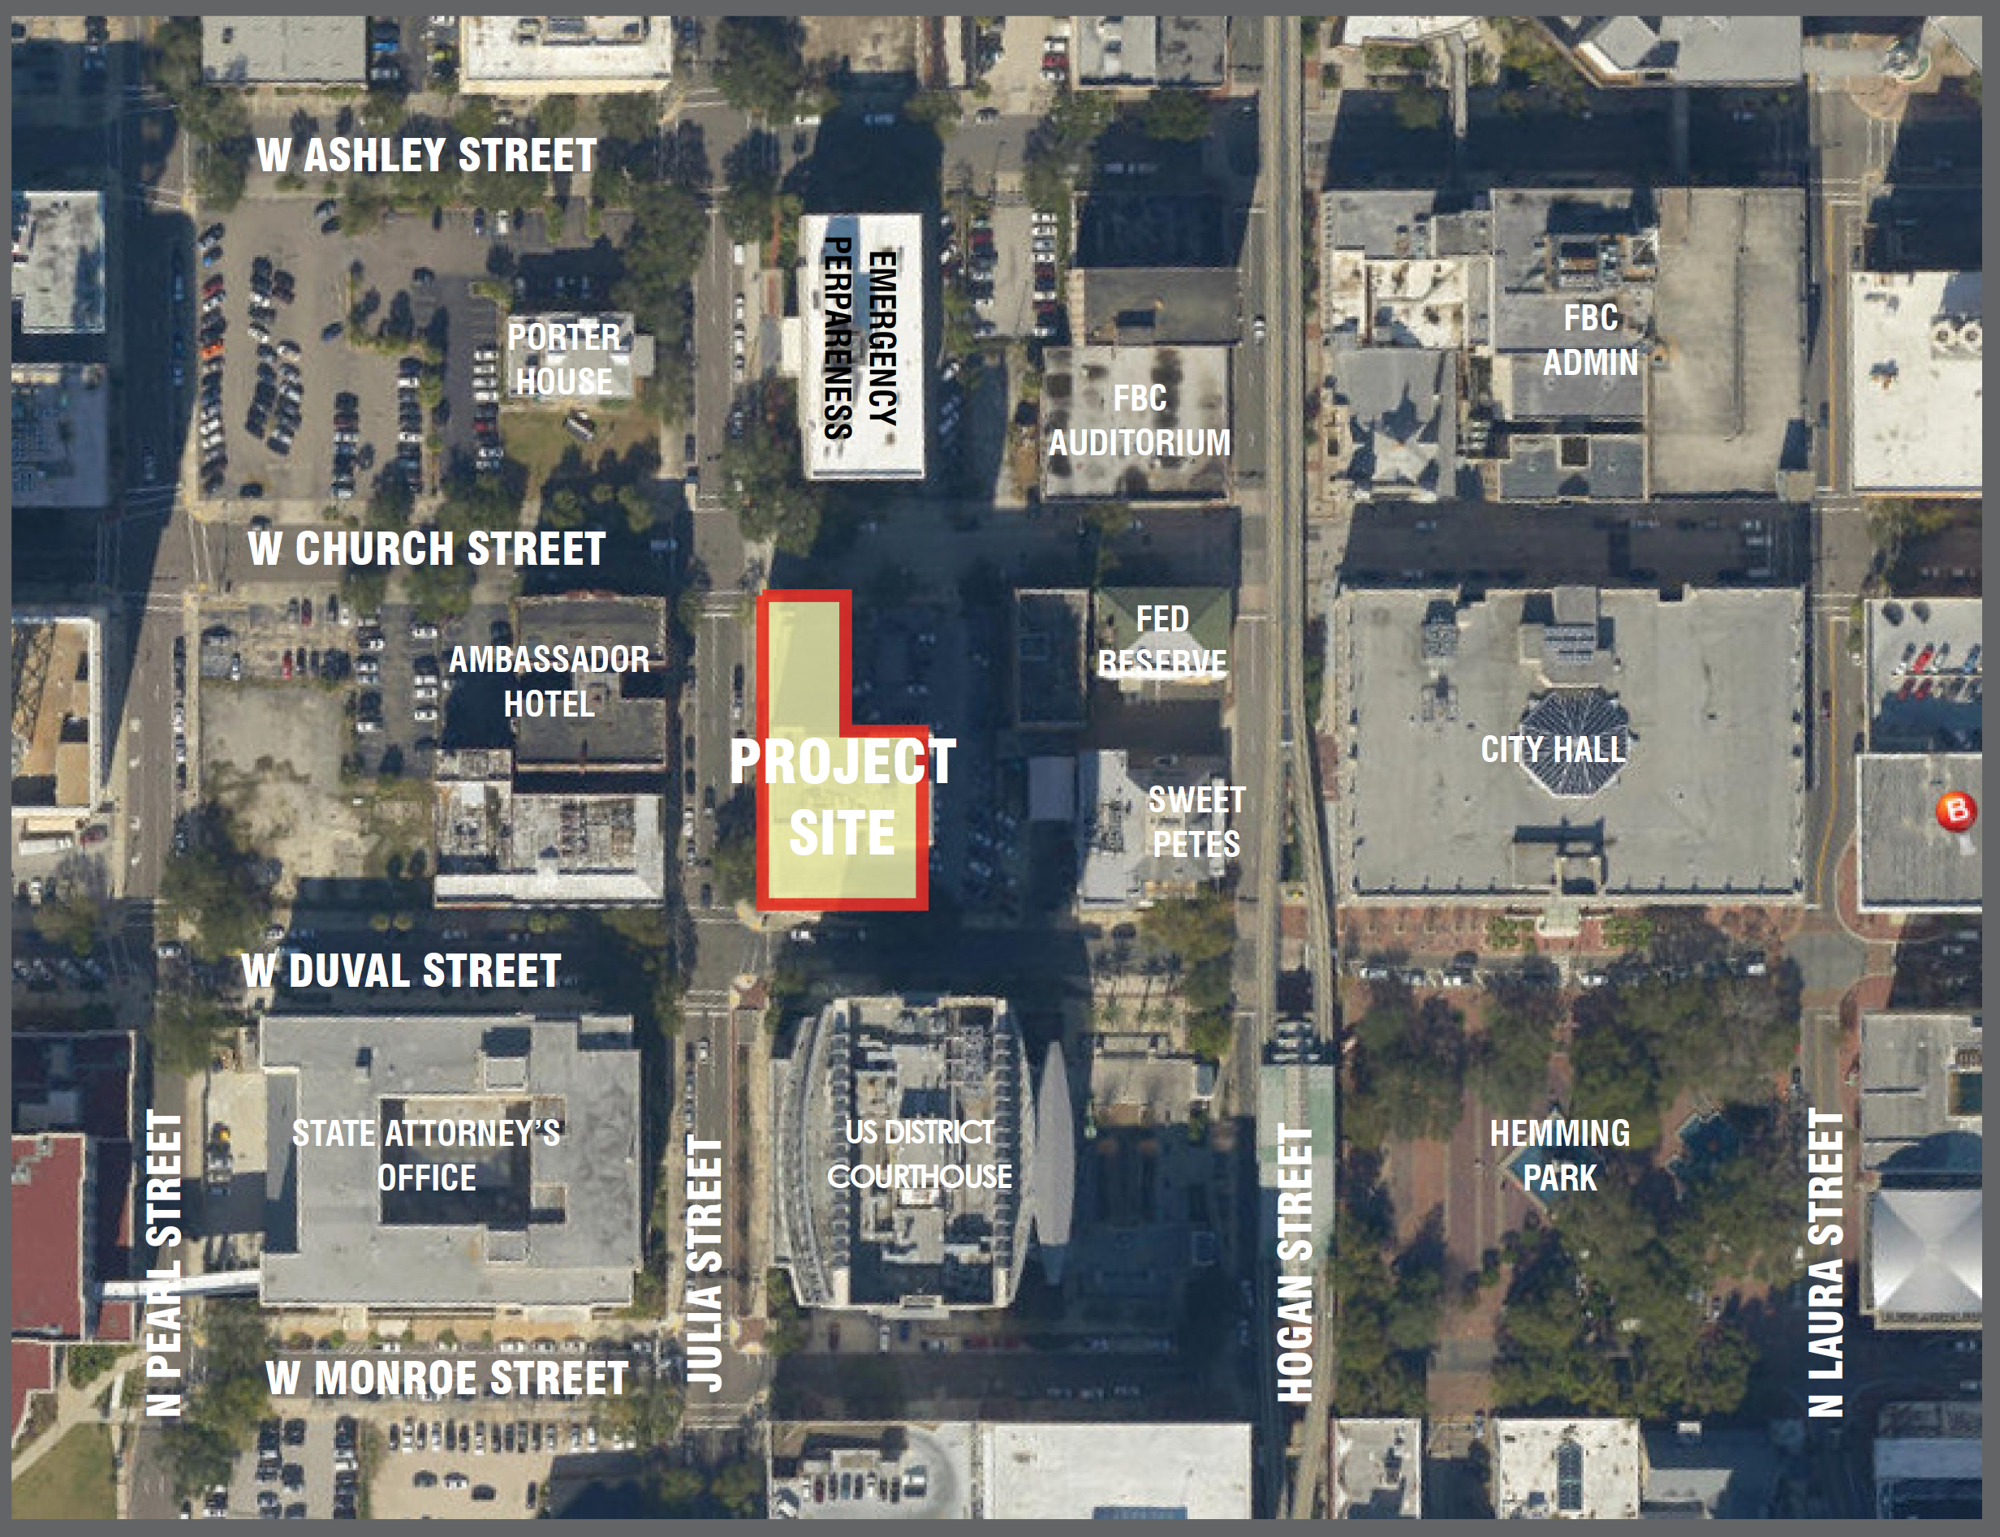 The building is at at 233 W. Duval St. Downtown.